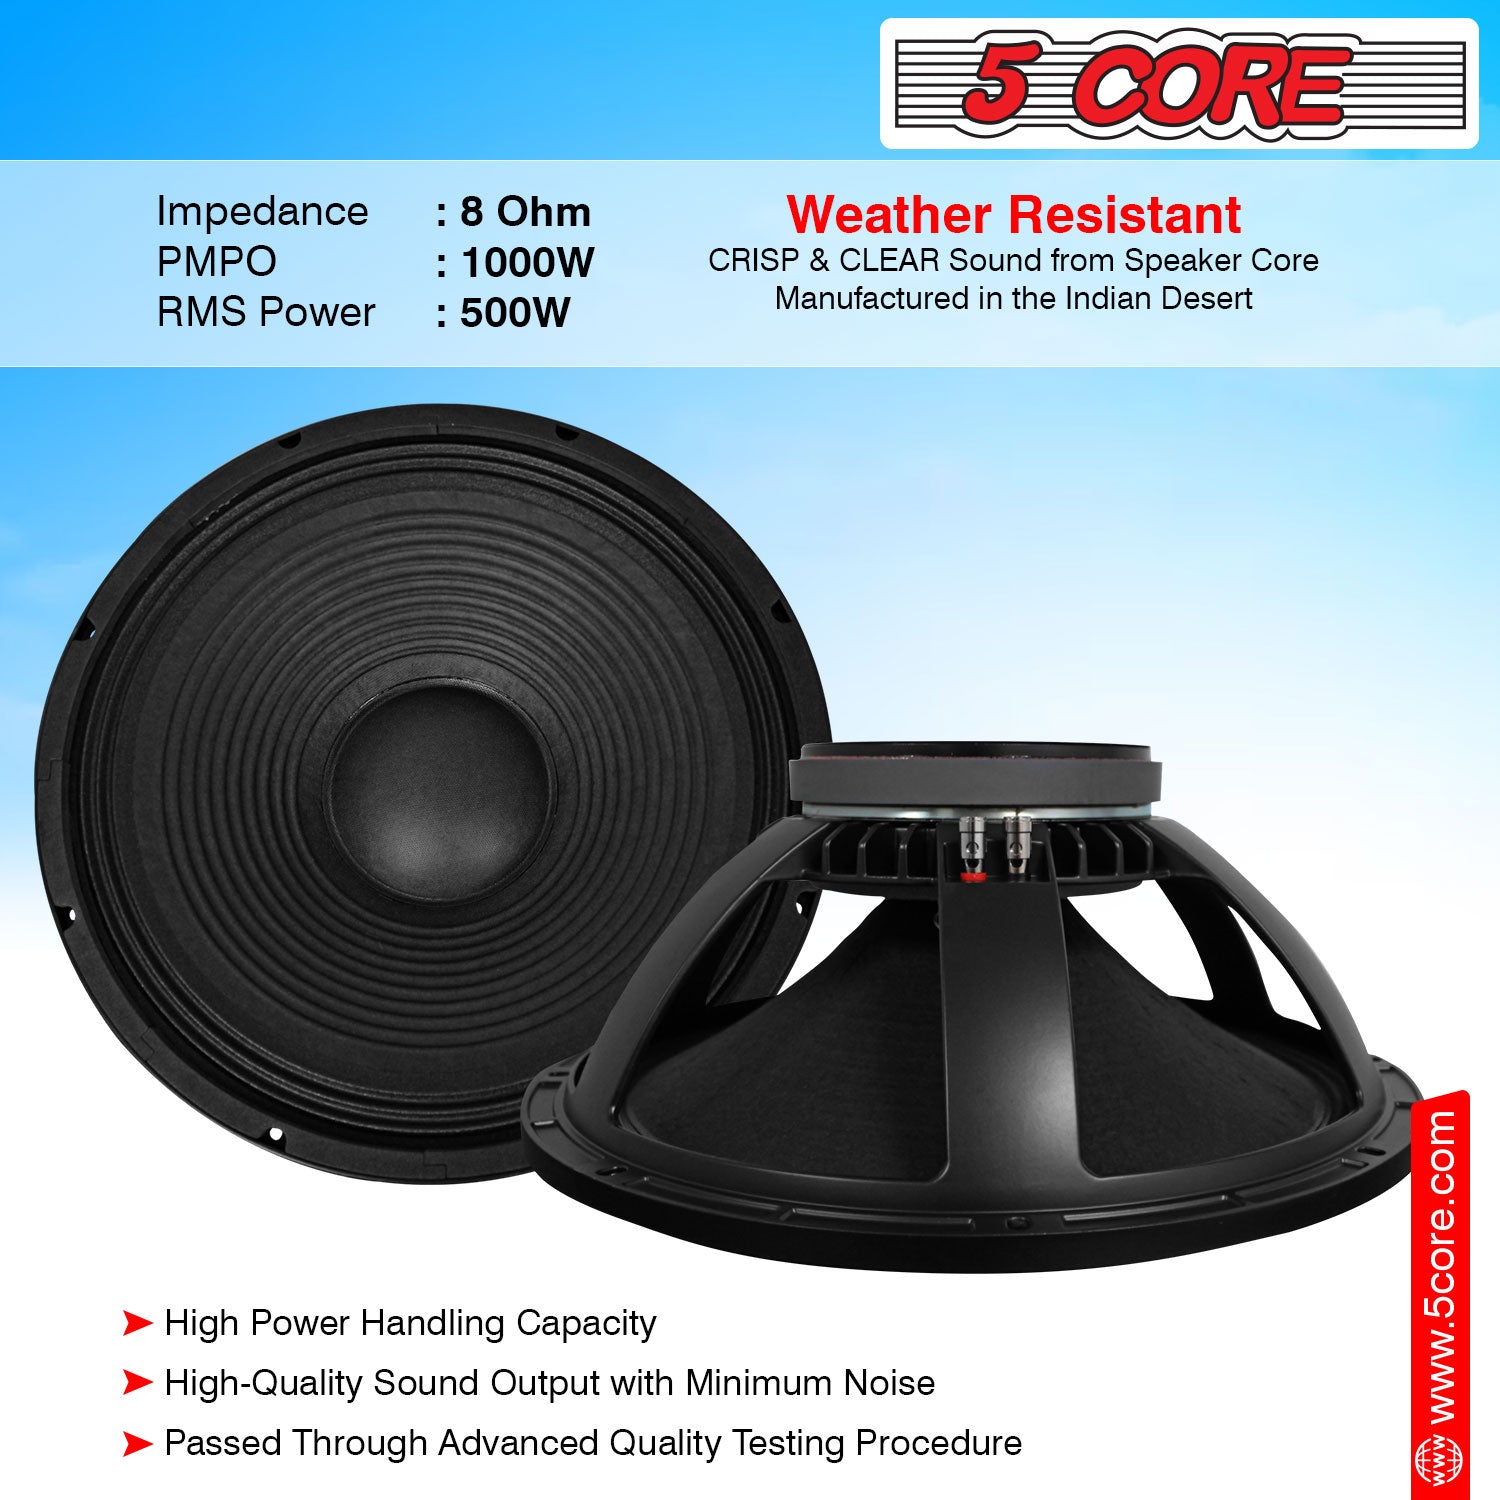 5 core 15" subwoofer weather resistant